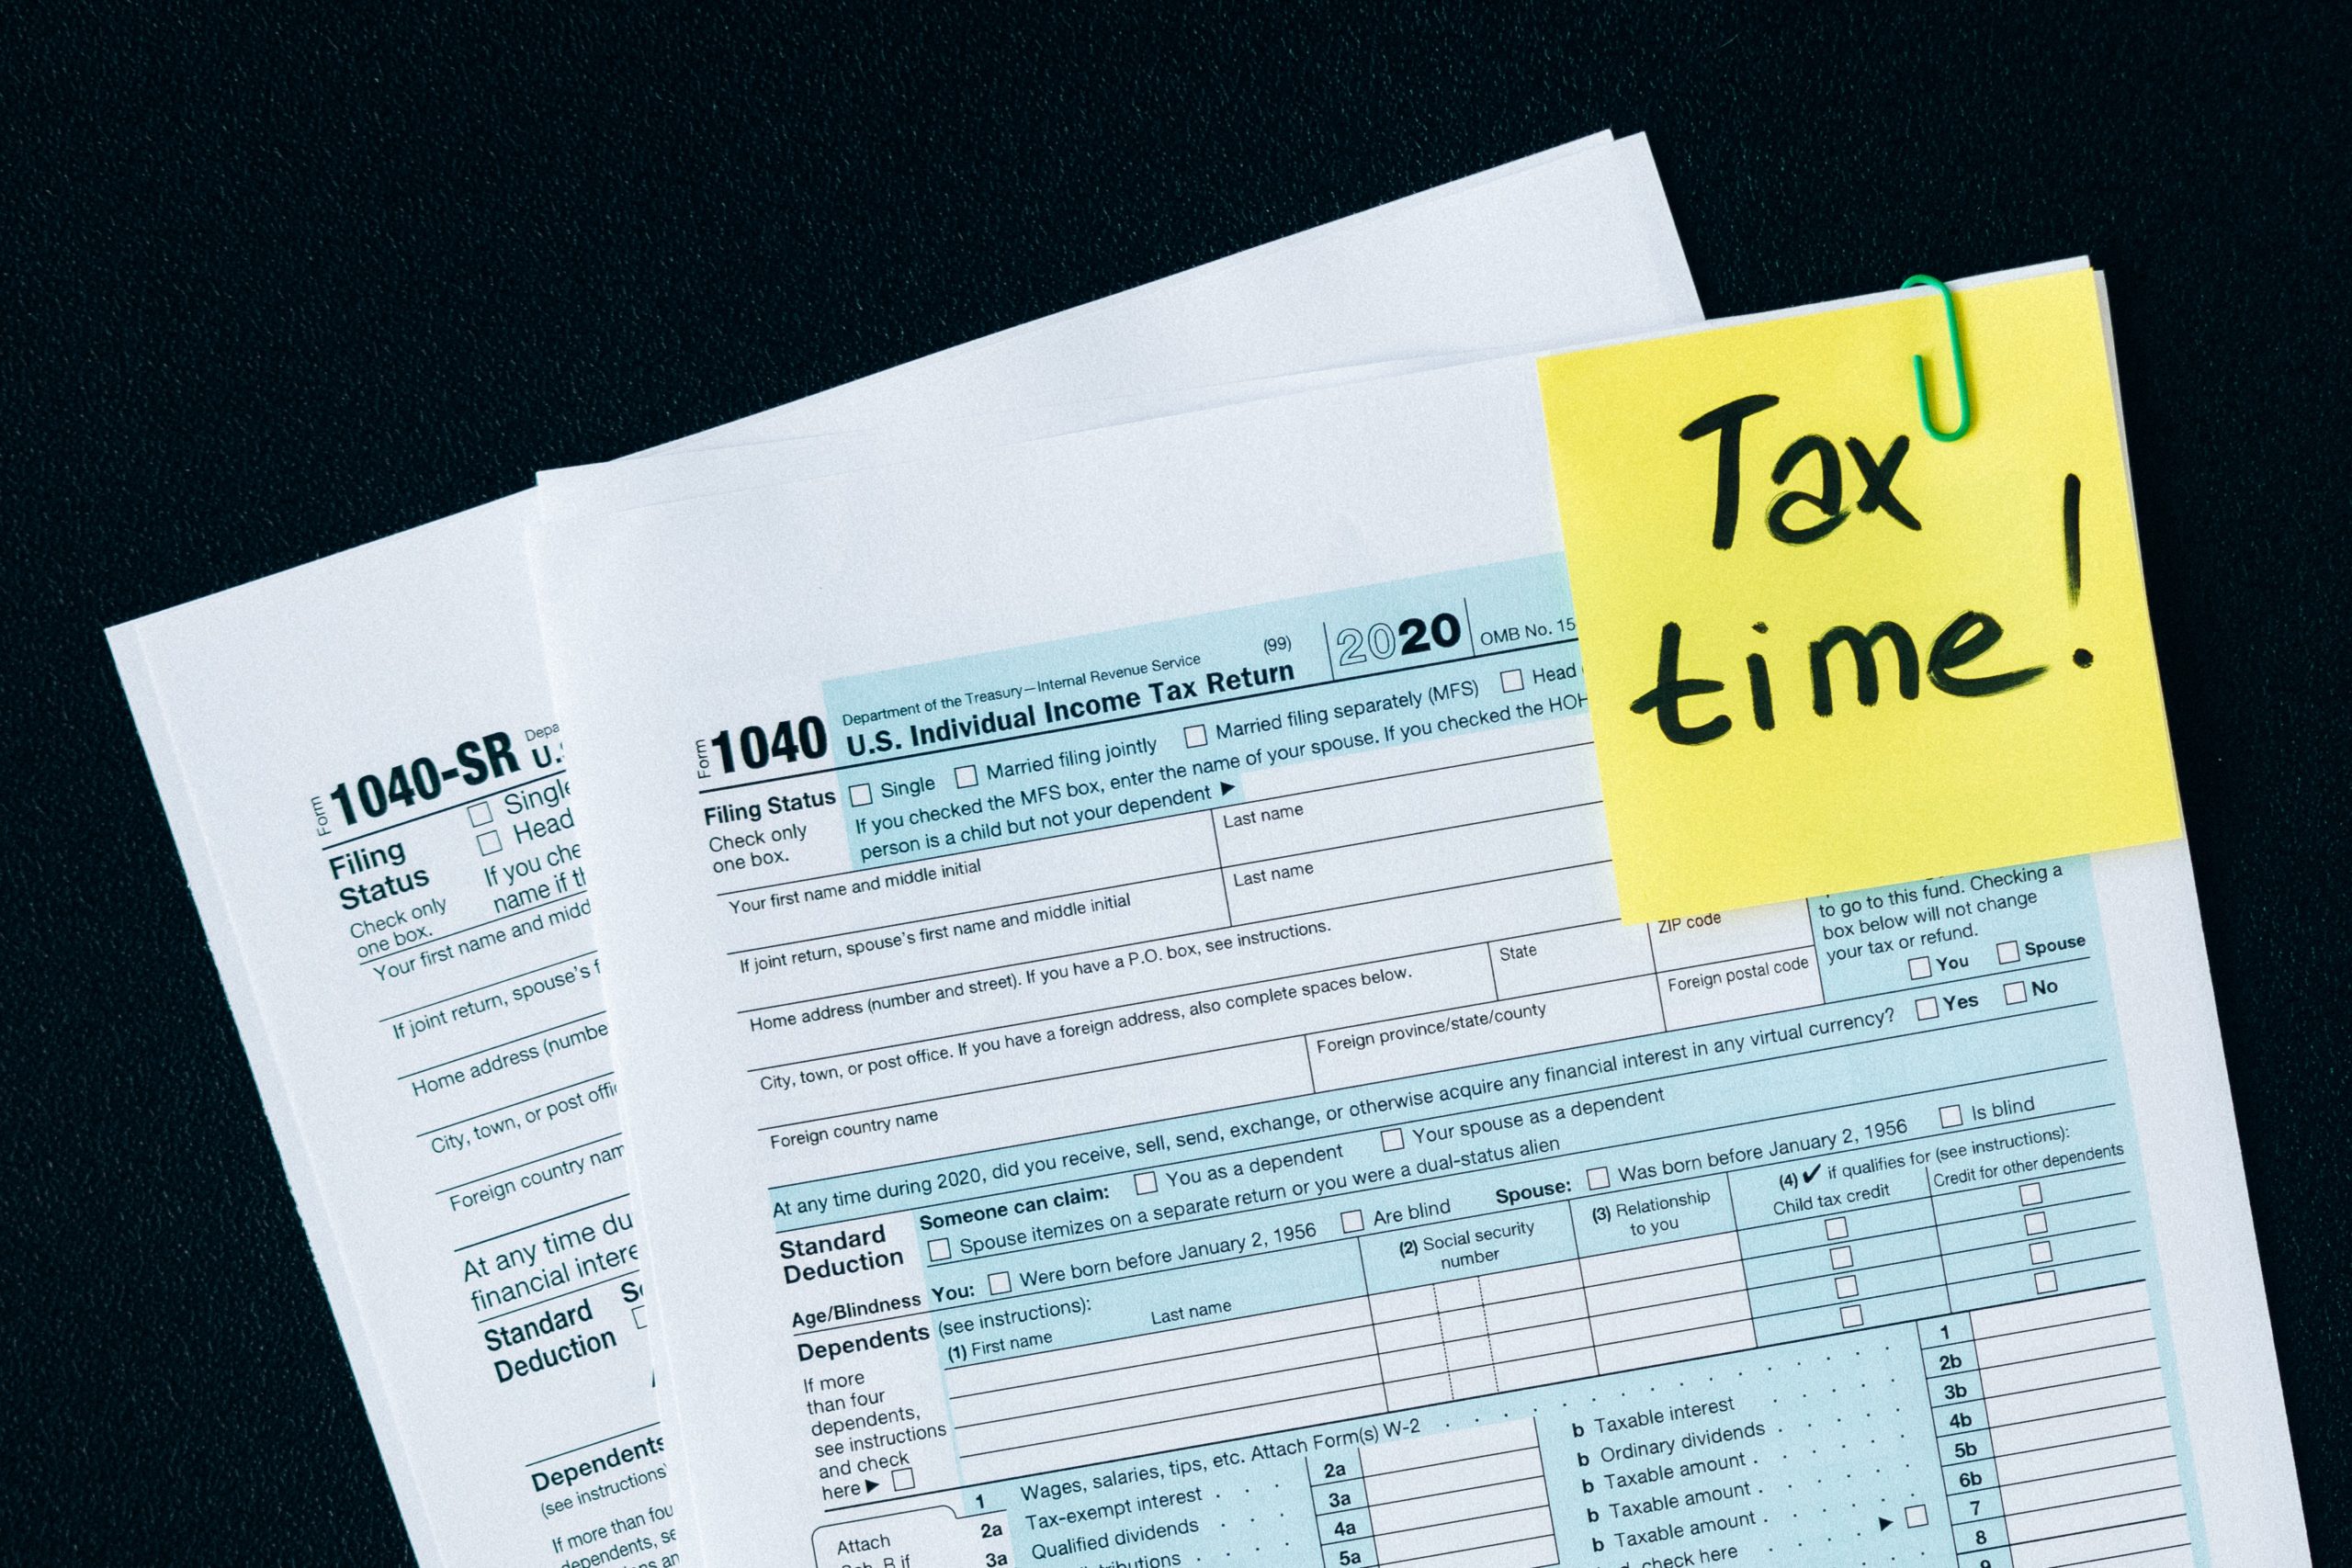 The Complete Guide to Understanding Form 1040: A Resource for CPAs and Accounting Firms | Image courtesy: Photo by Nataliya Vaitkevich, Pexels